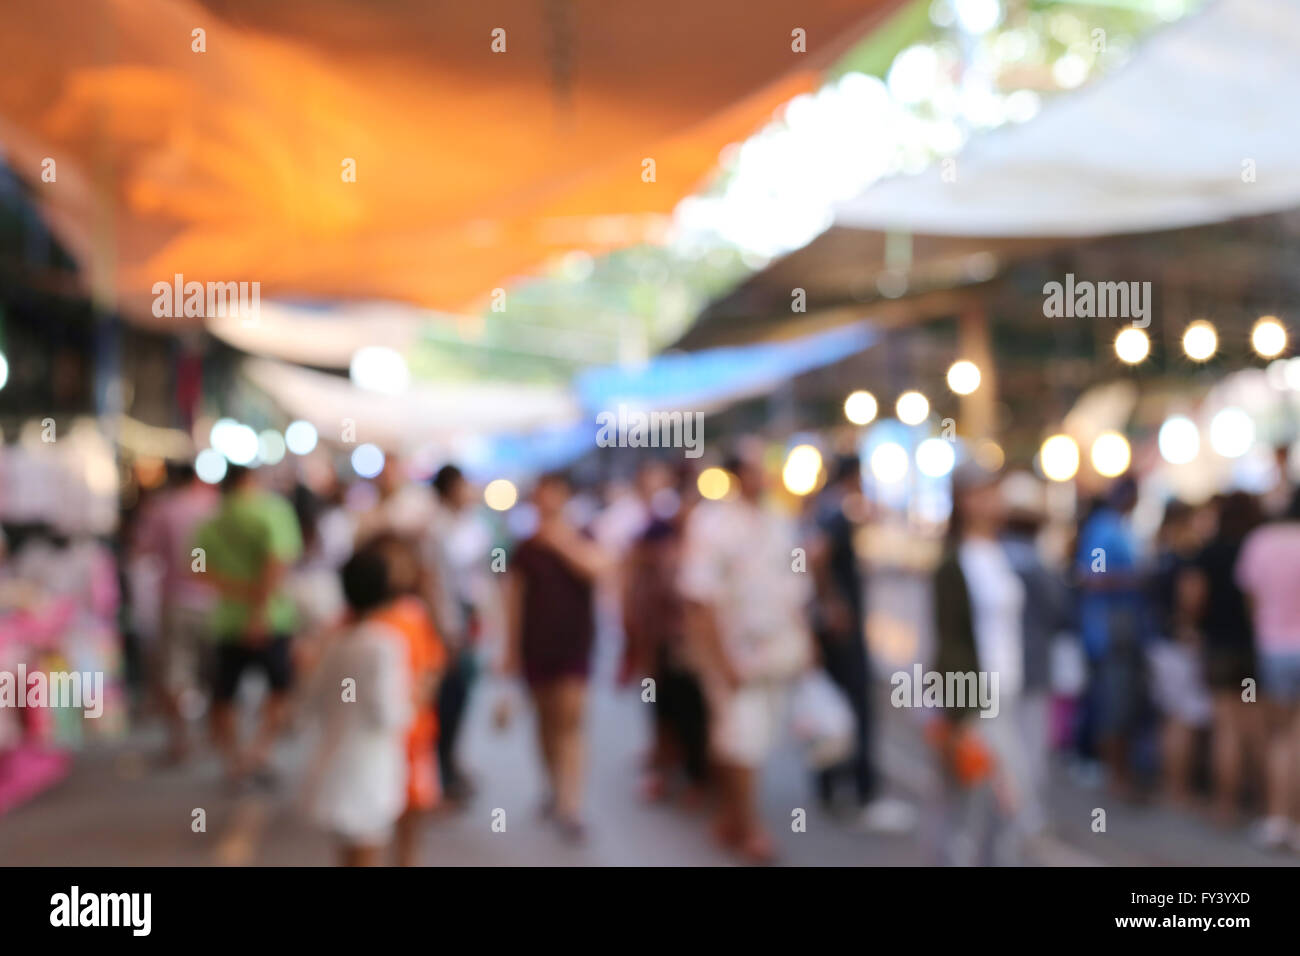 Market of purchase in a blur style for abstract design. Stock Photo